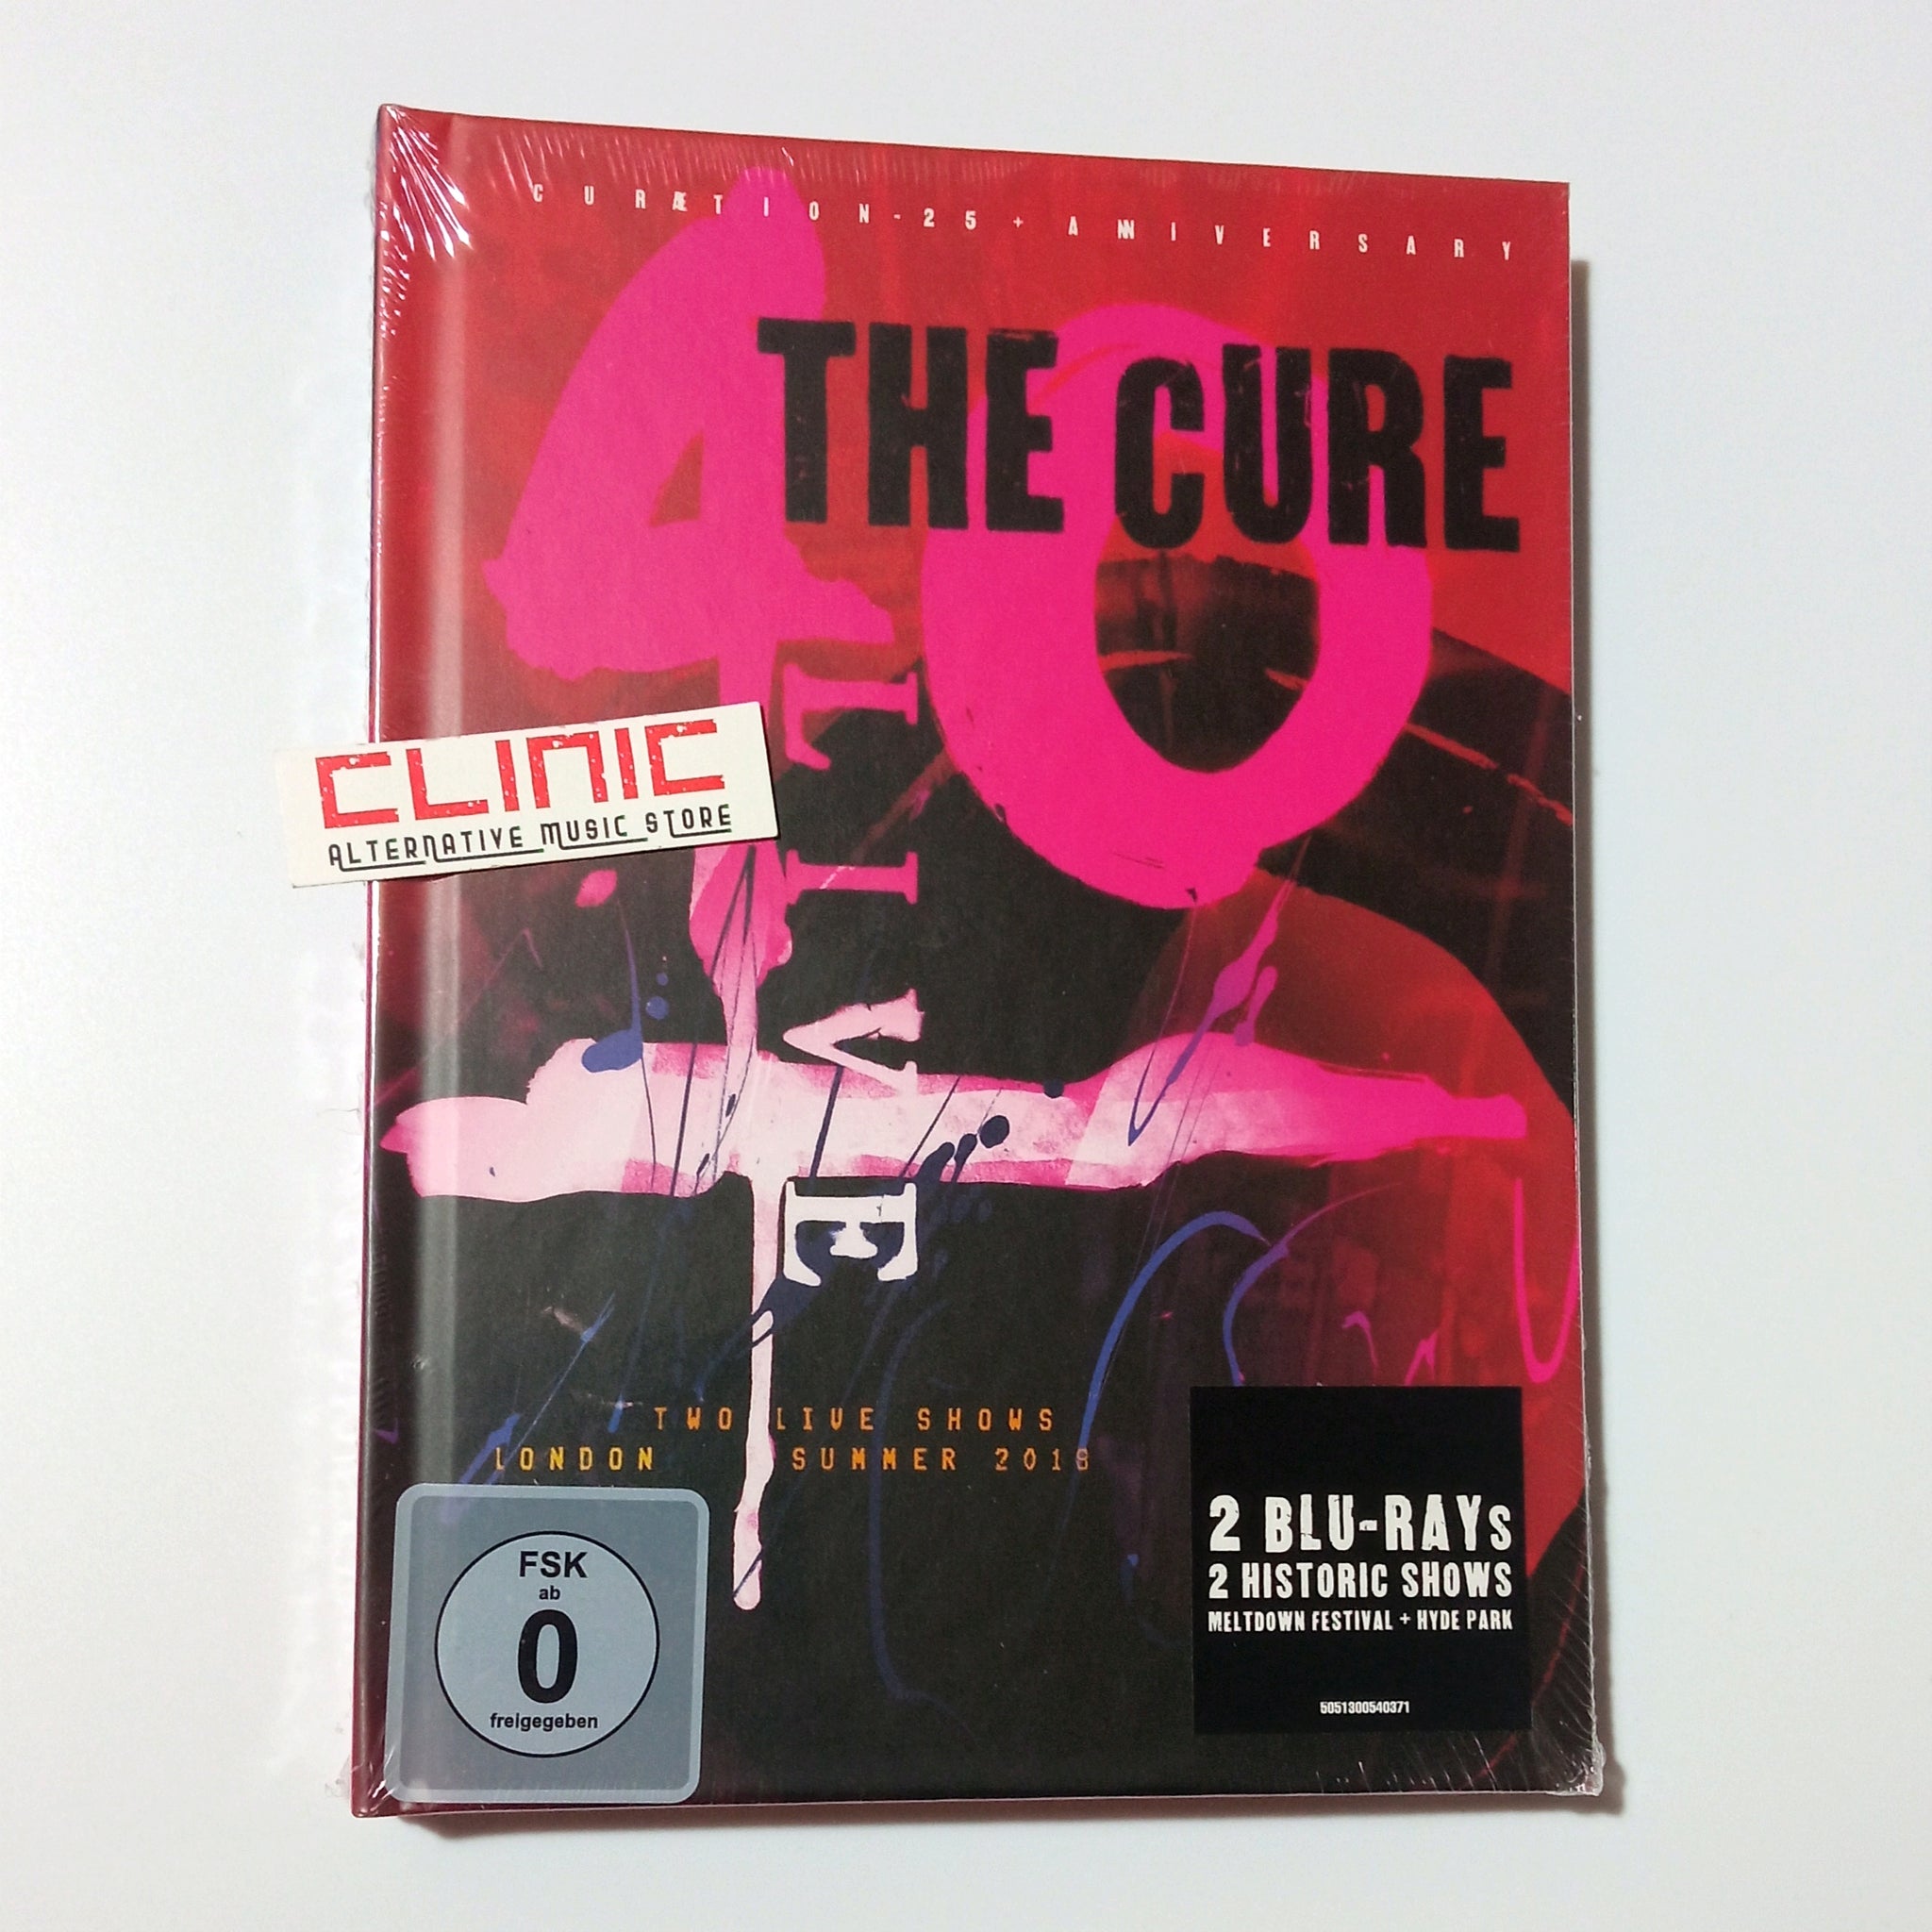 BLURAY - THE CURE - 40 LIVE (CURAETION 25 + ANNIVERSARY)